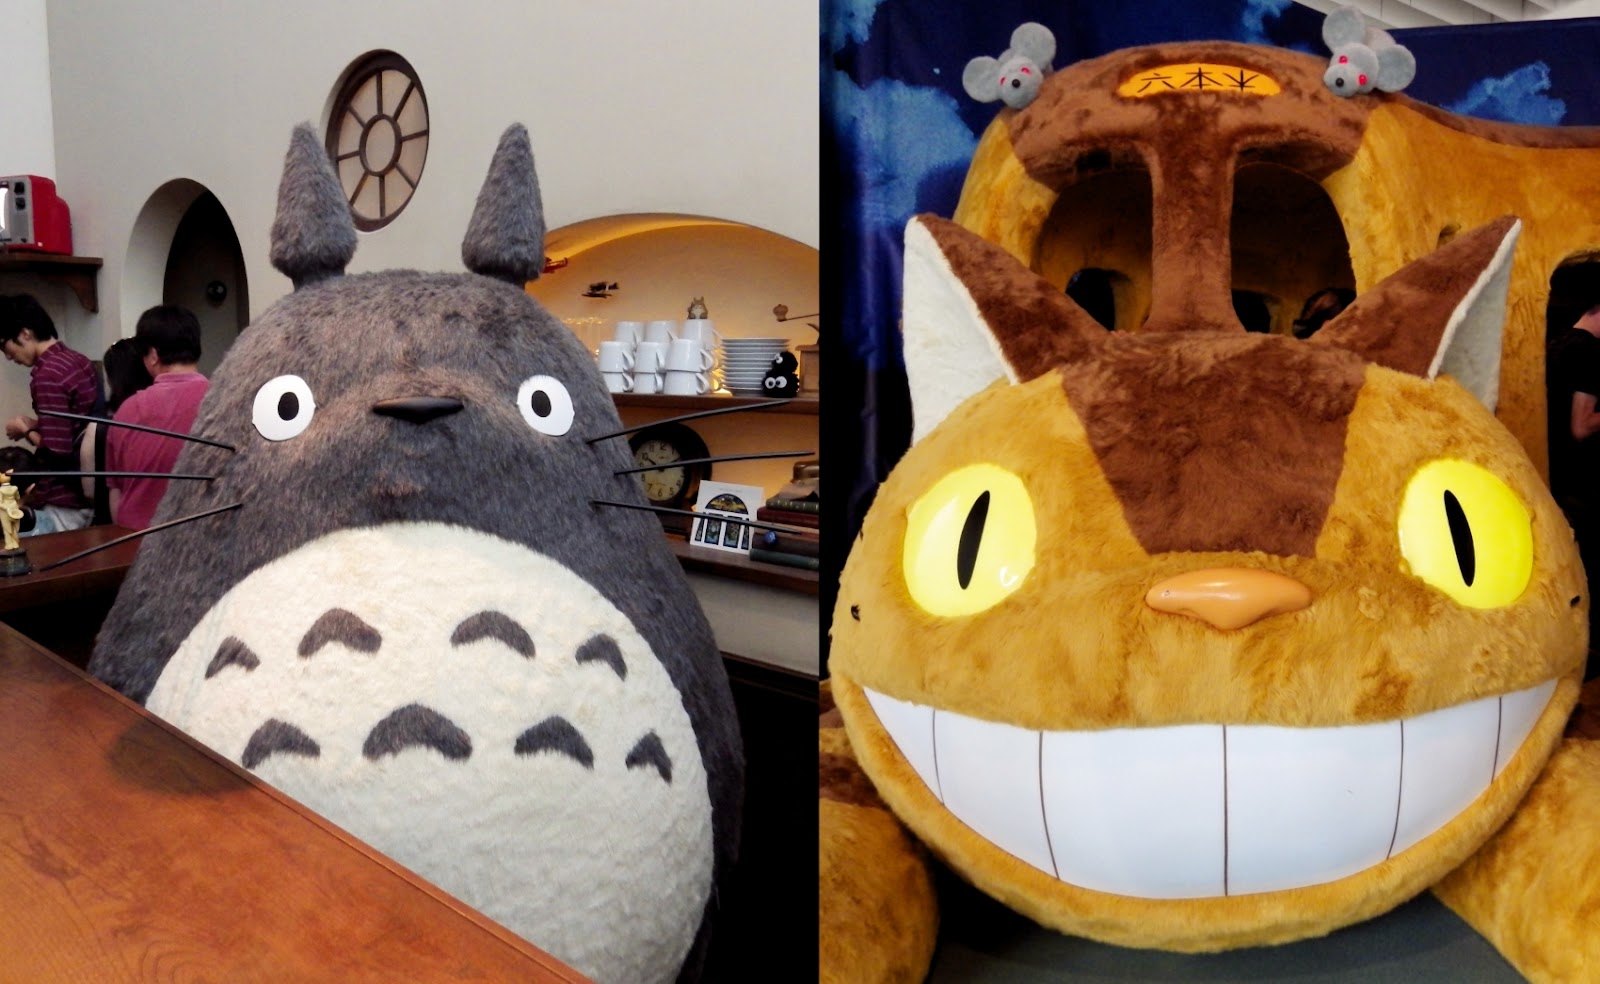 Totoro and Catbus displays at the Ghibli exhibition in Roppongi Hills, Tokyo, 2016.